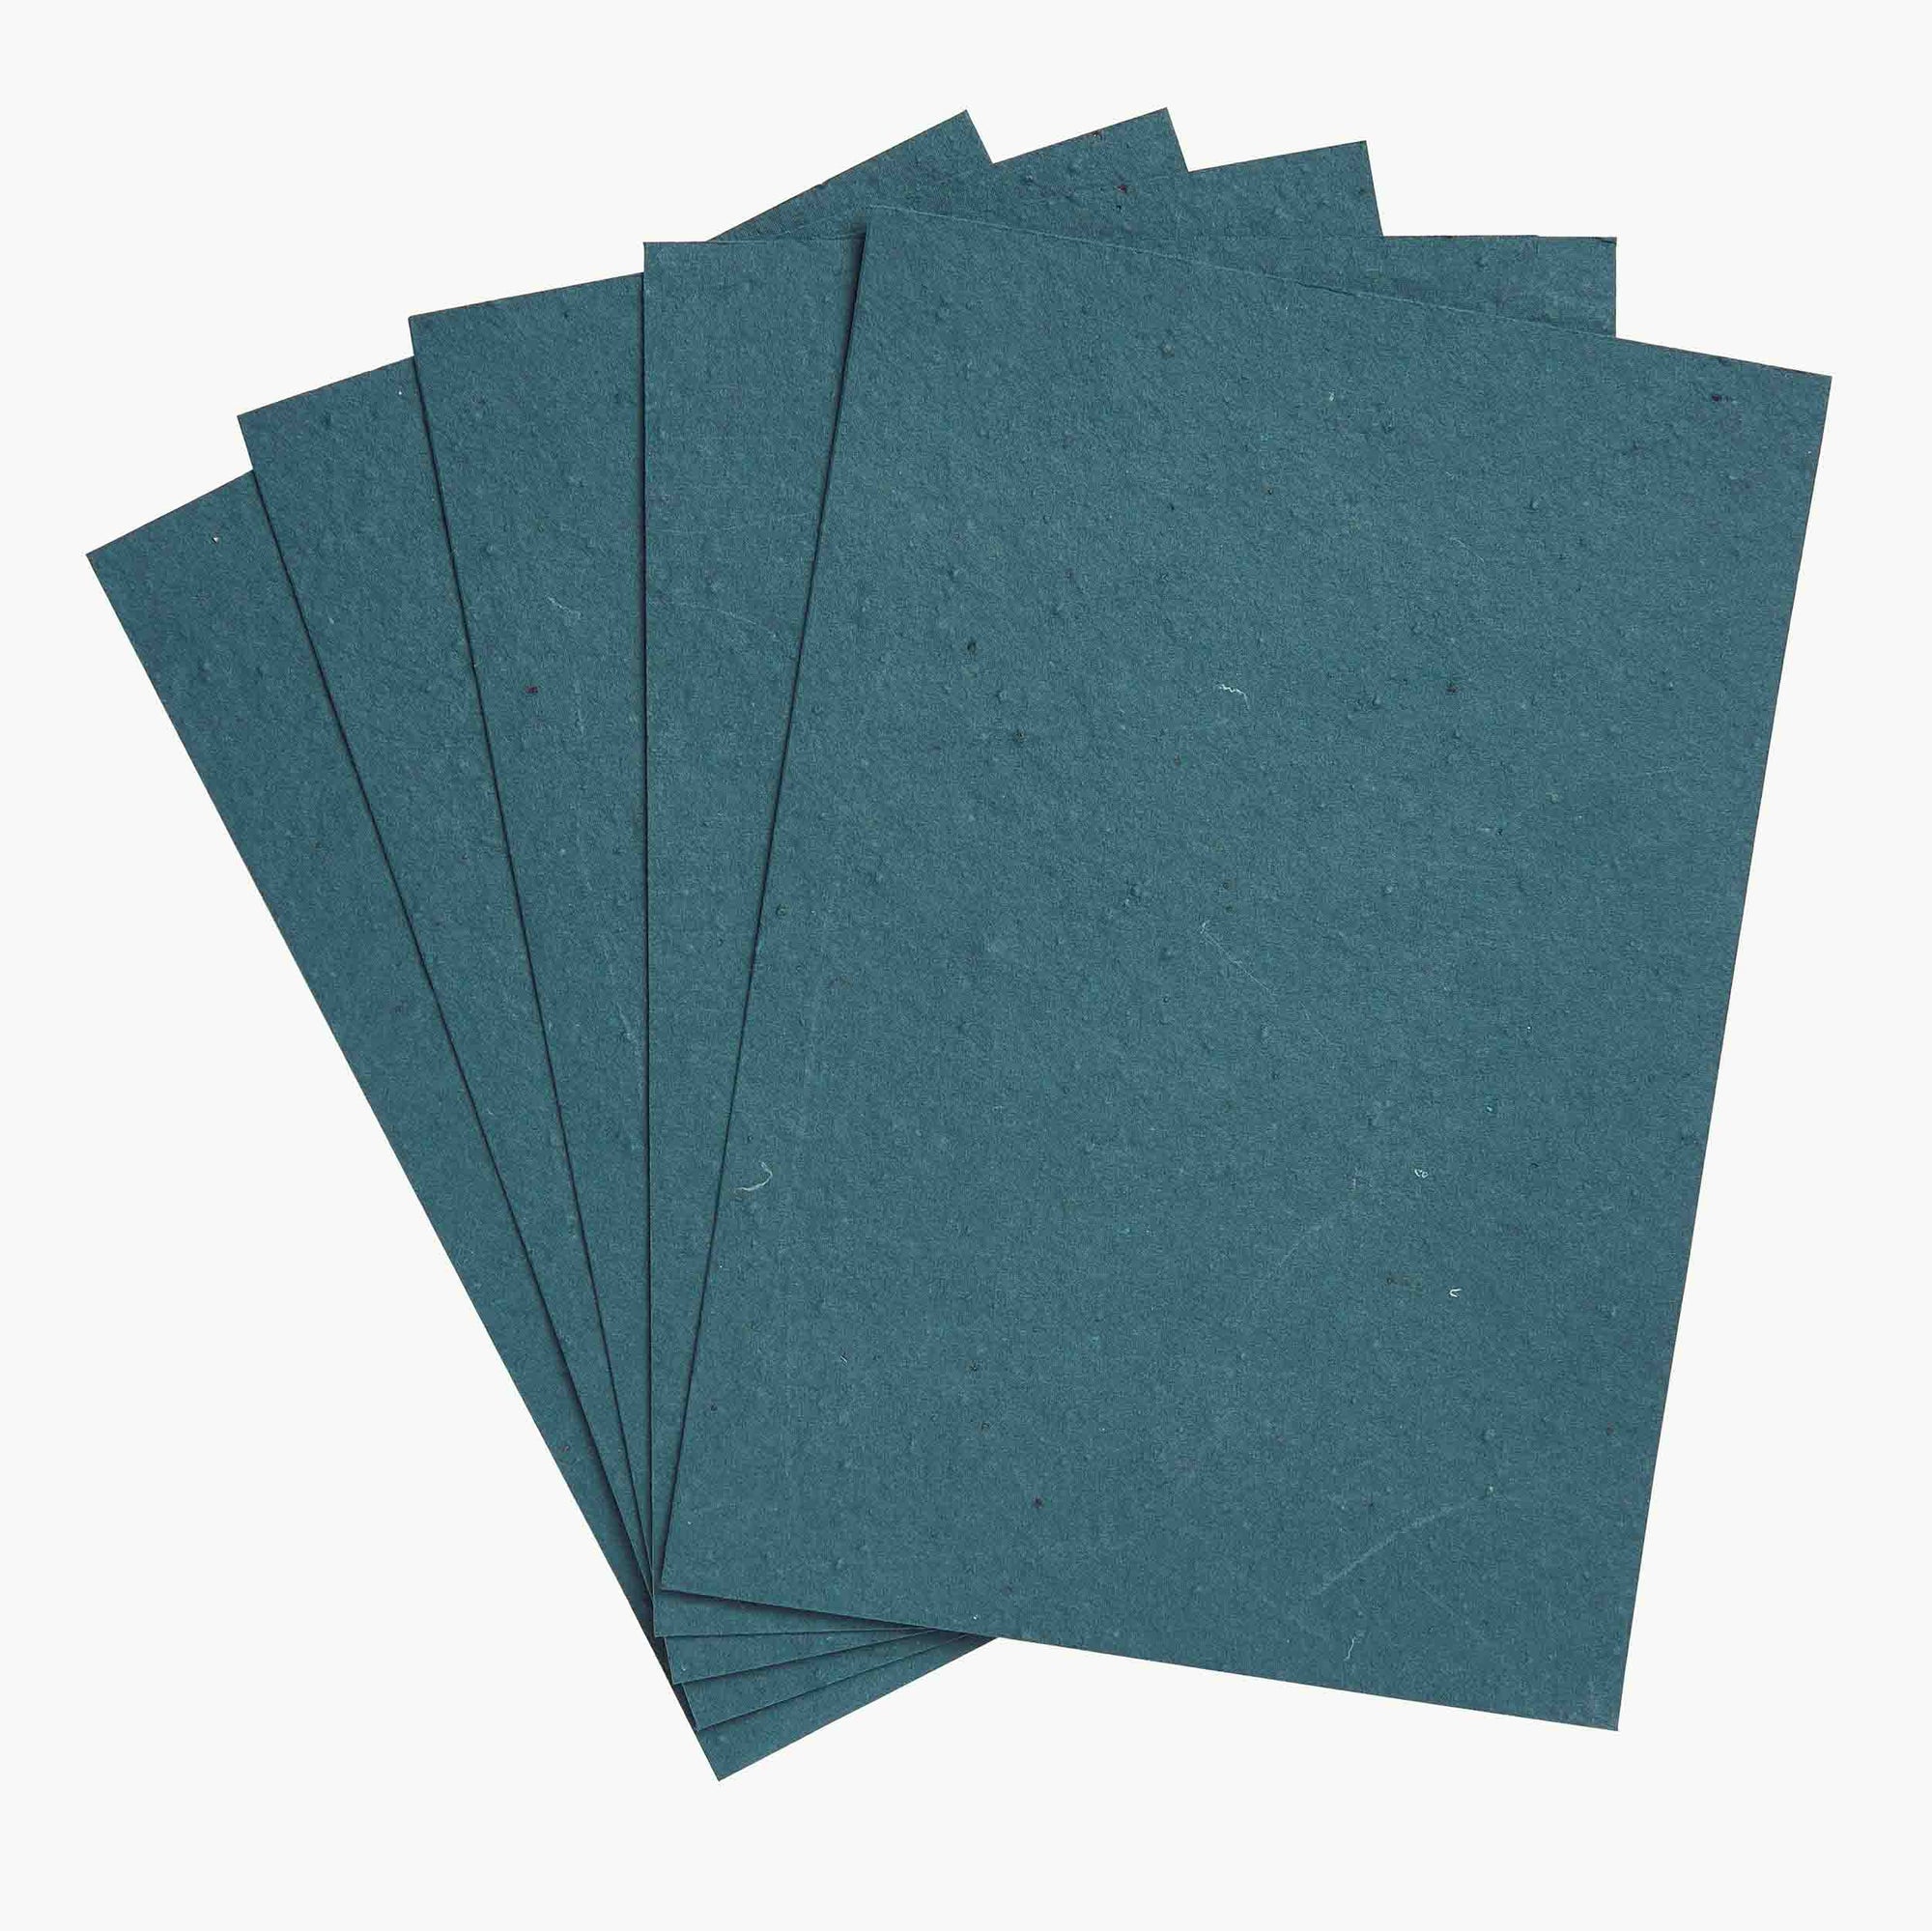 Eco-friendly handmade wildflower seed paper in a teal blue colour